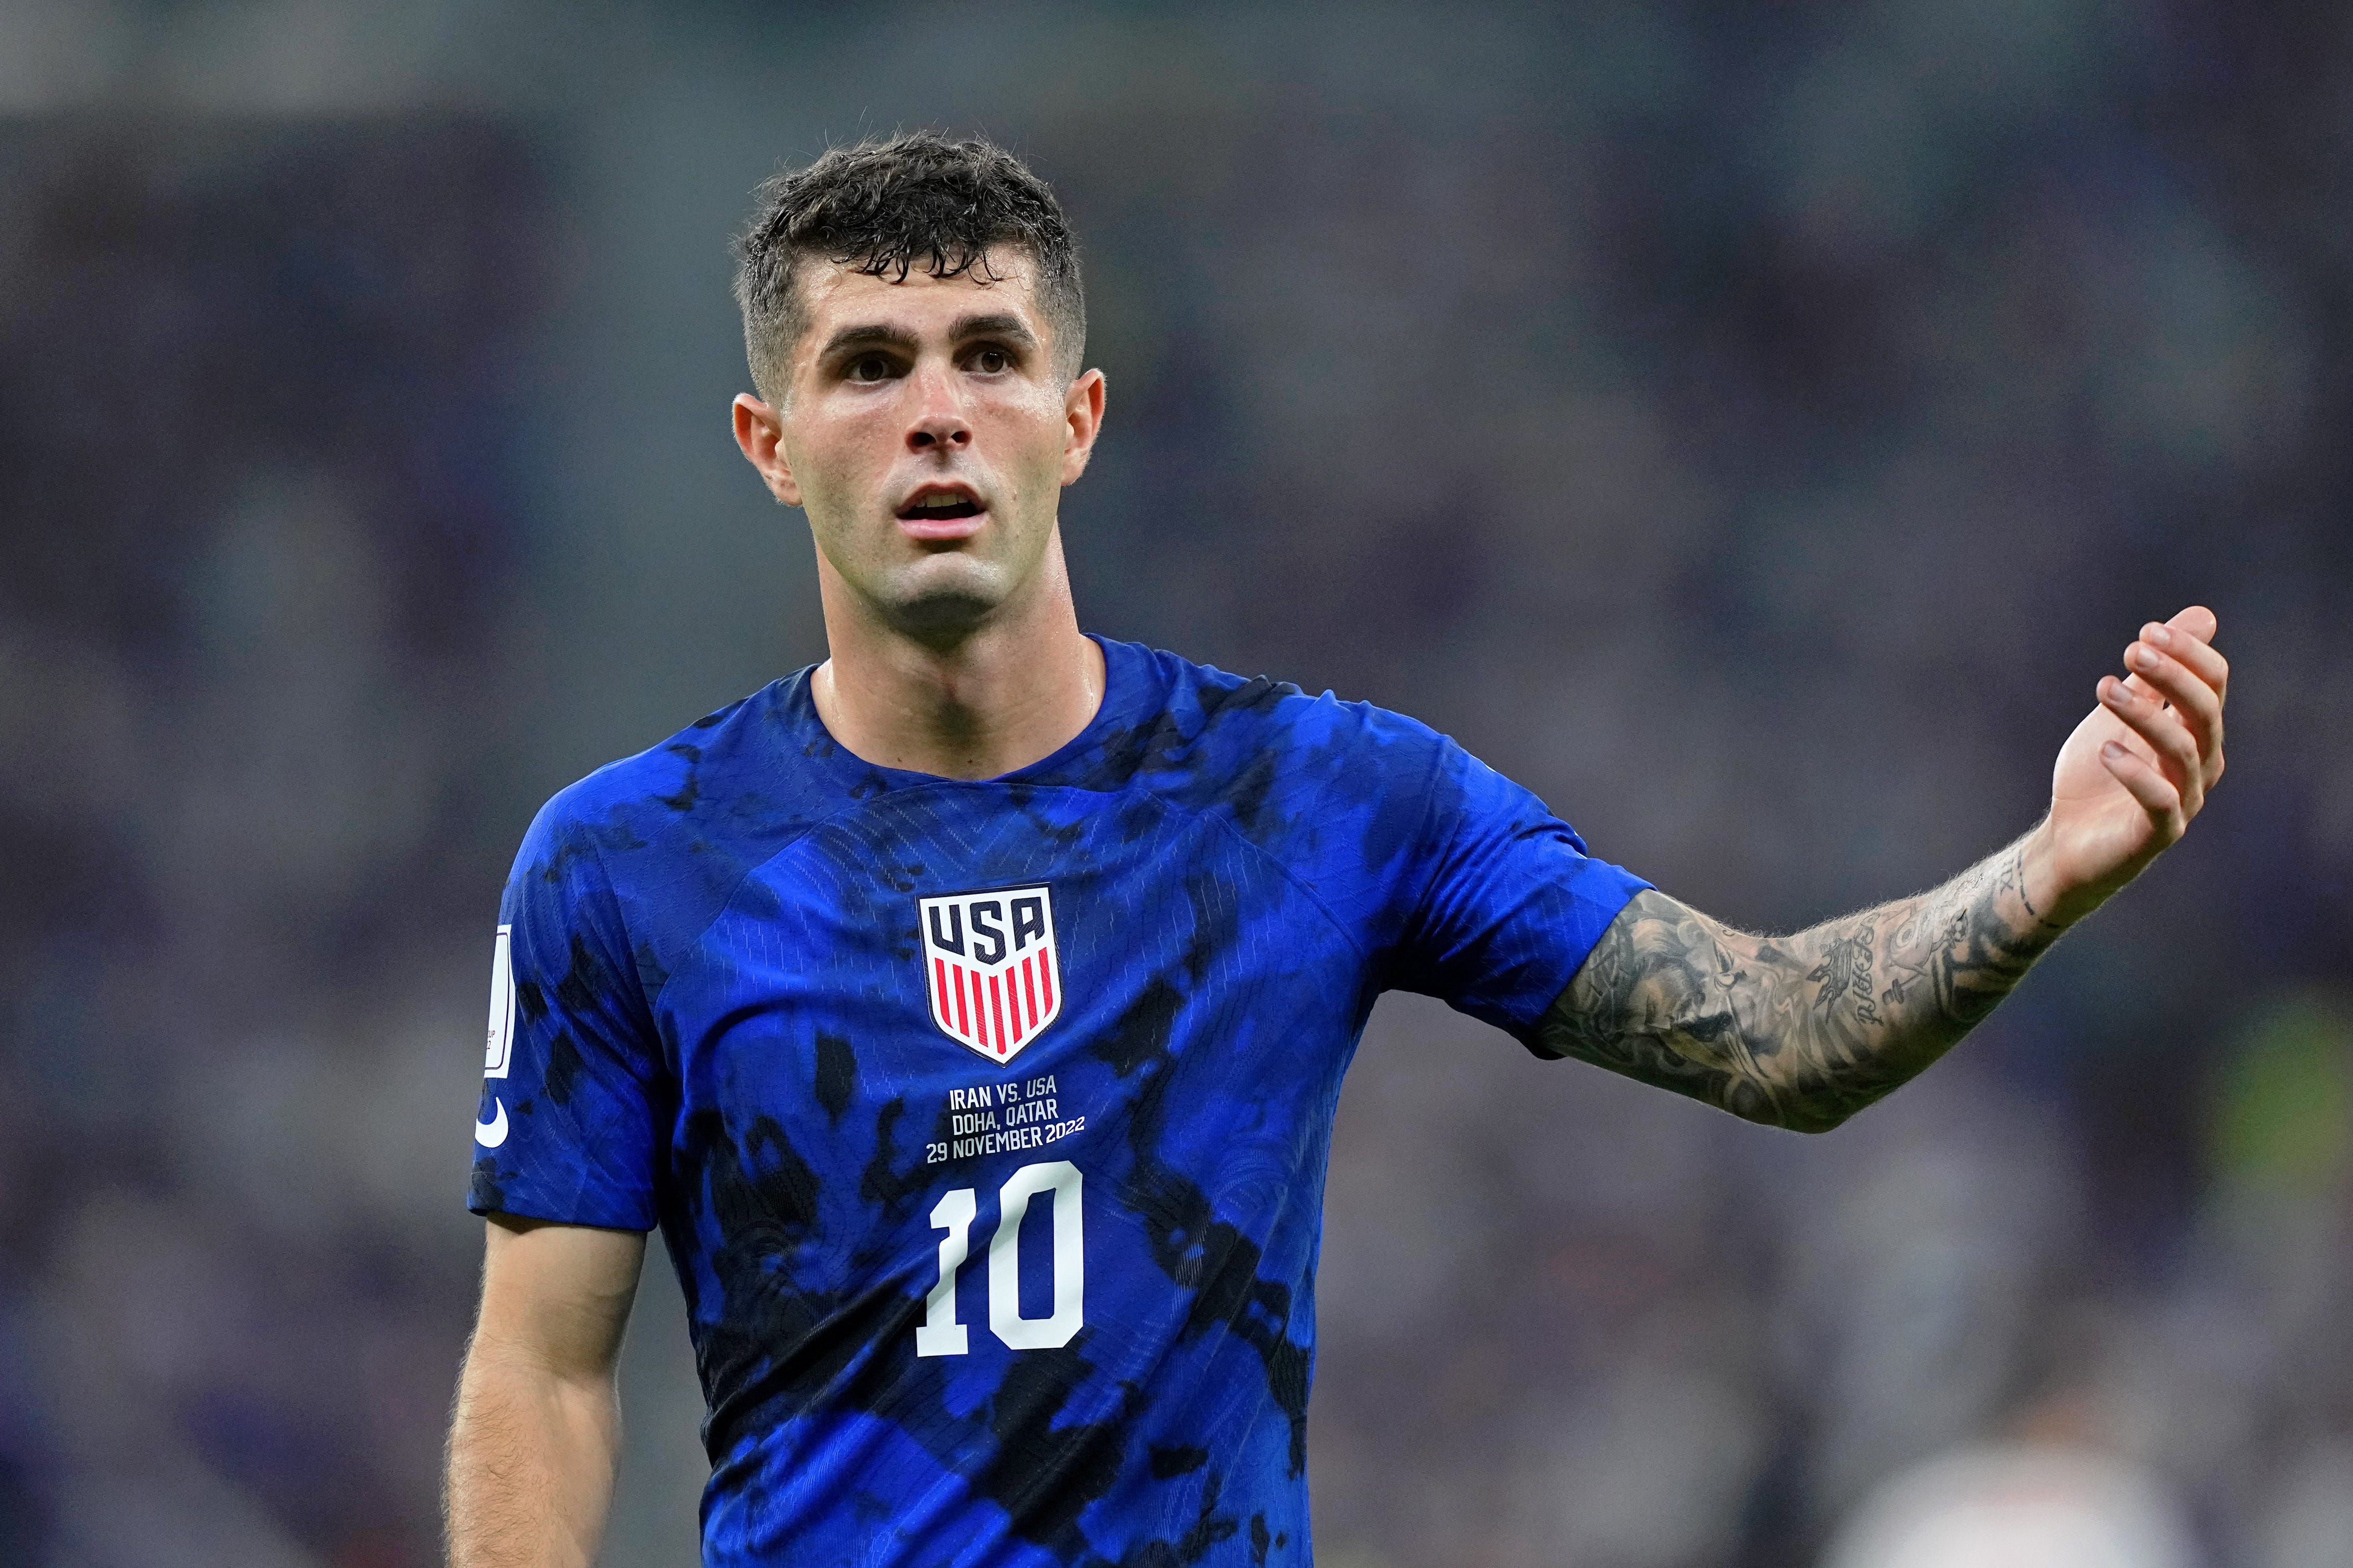 Bolstered by his teammates, Christian Pulisic has grown into his role | Opinion